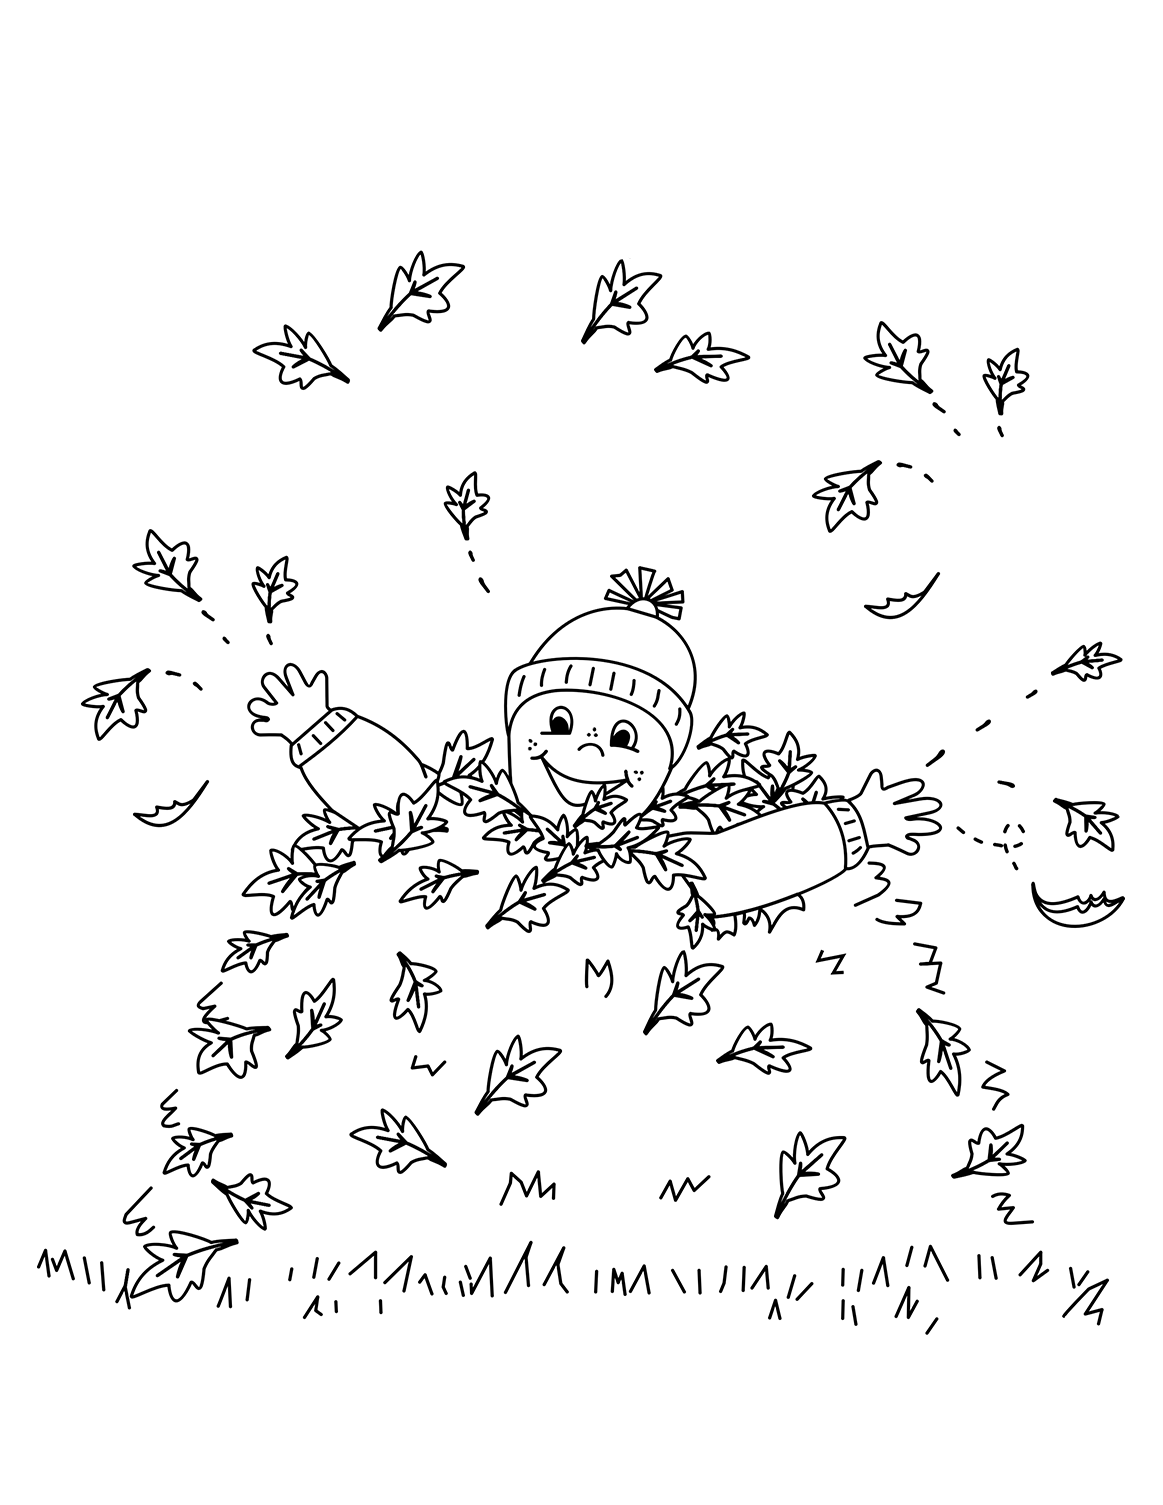 5 Free Fall Coloring Sheets: Autumn Season Coloring Pages - ALL ESL